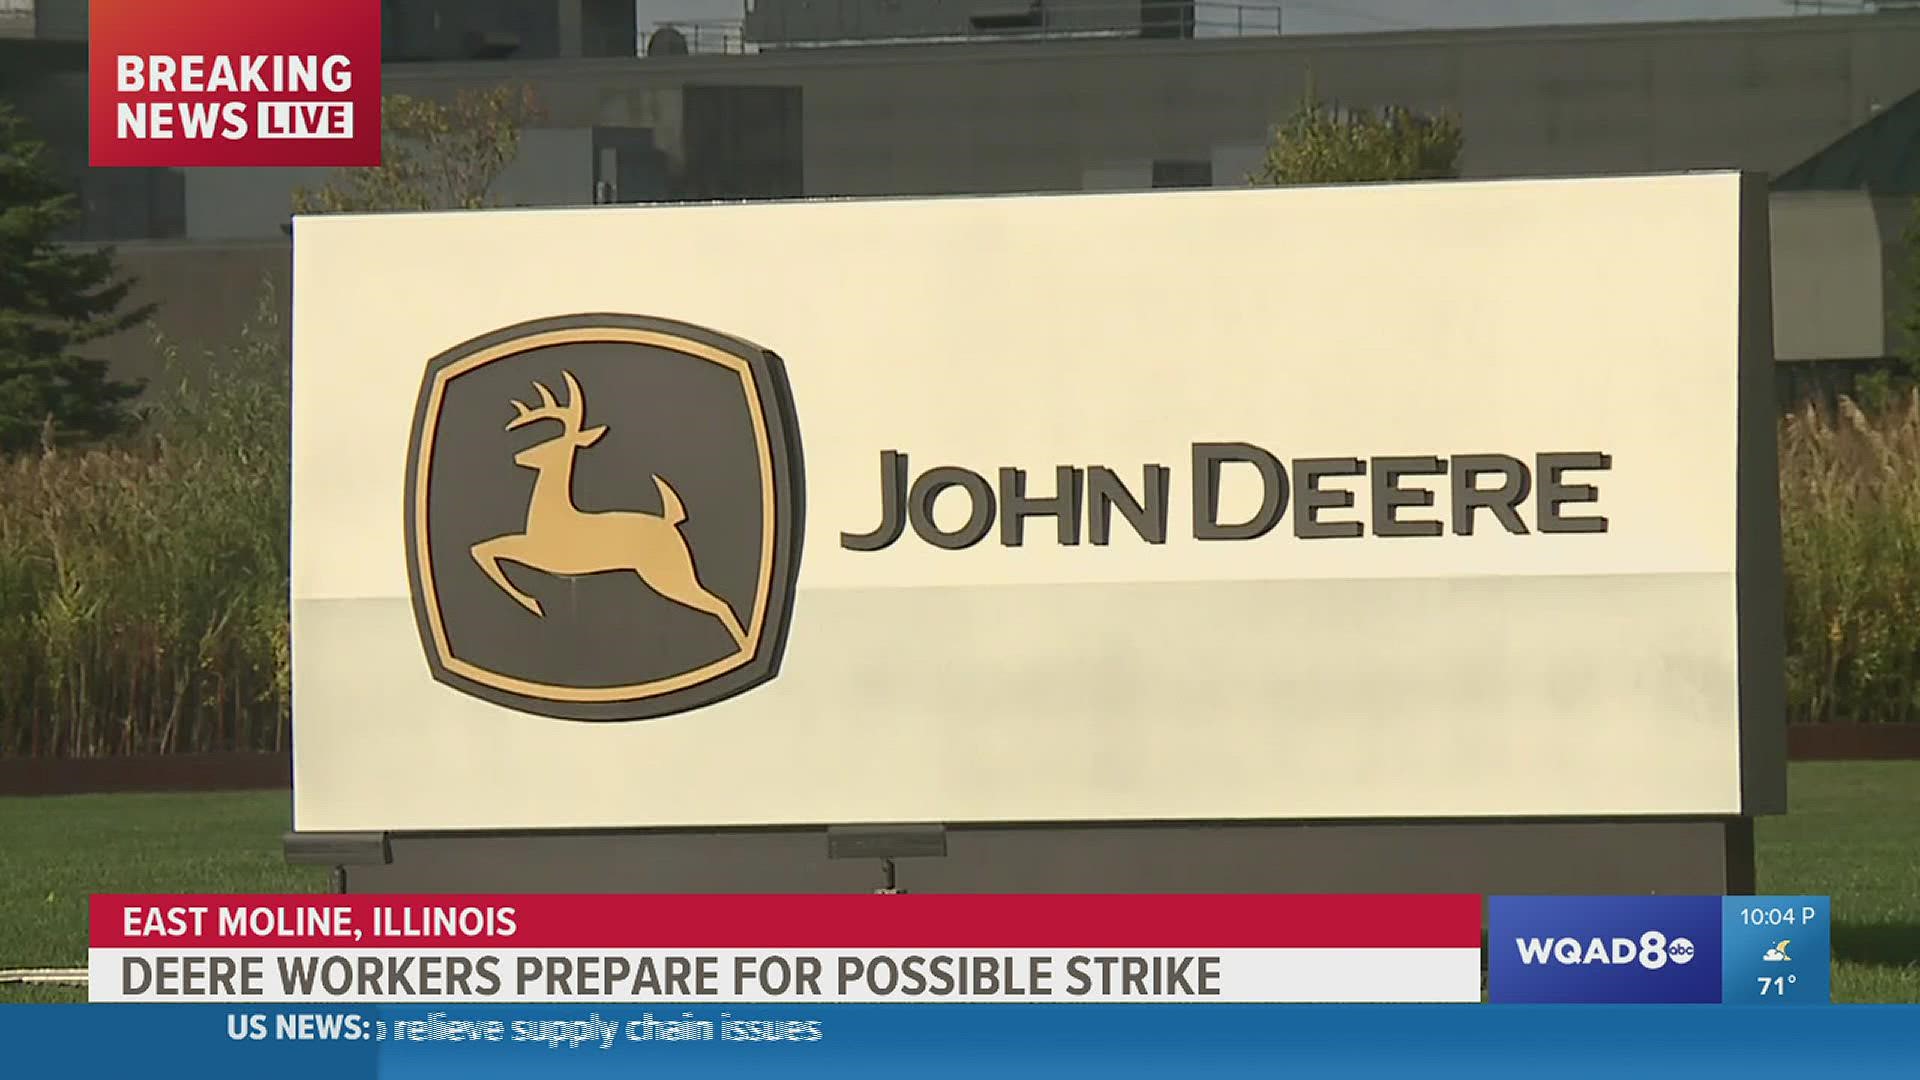 The worker says work morale at John Deere has been worse over the last few months.